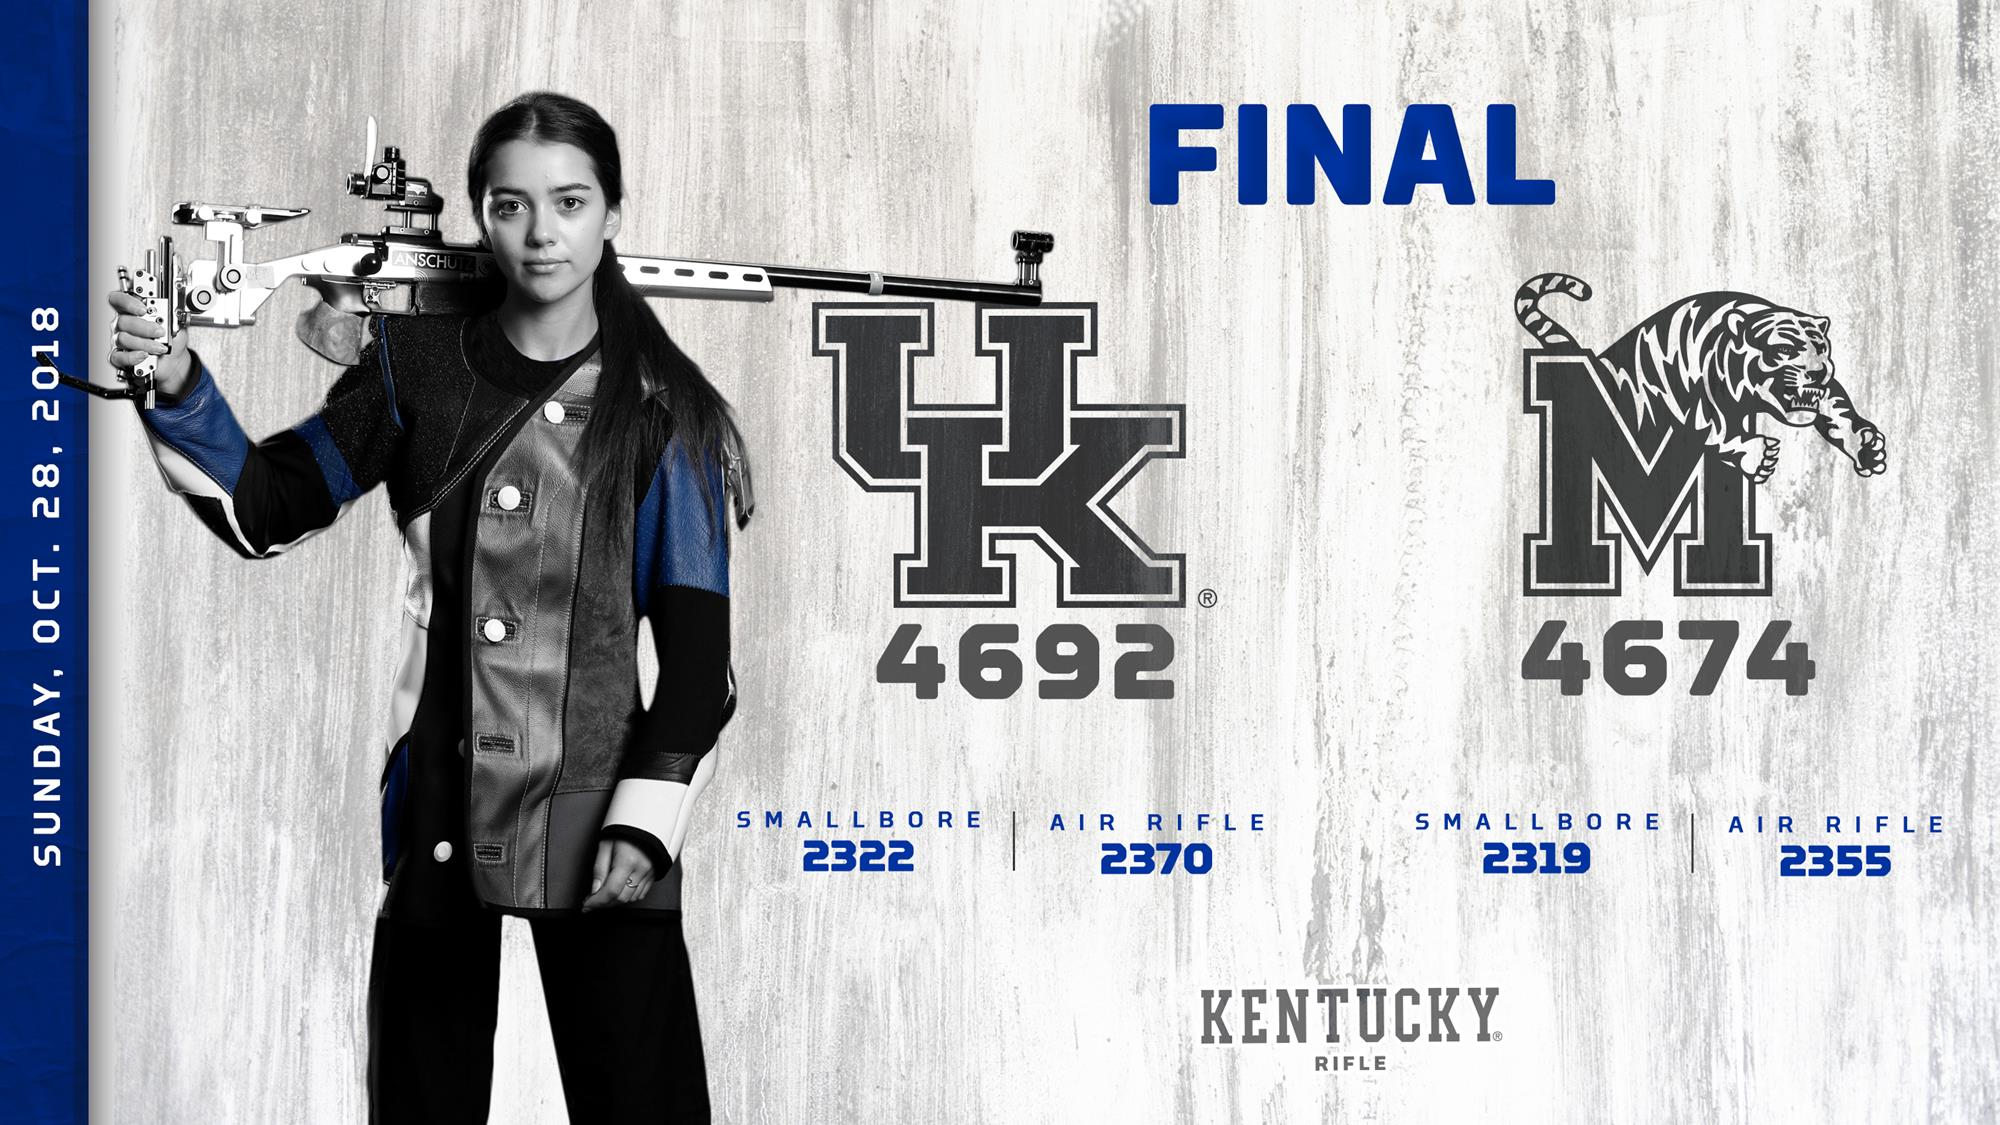 Kentucky Rifle Wraps Two-Match Weekend with 4692 at Memphis